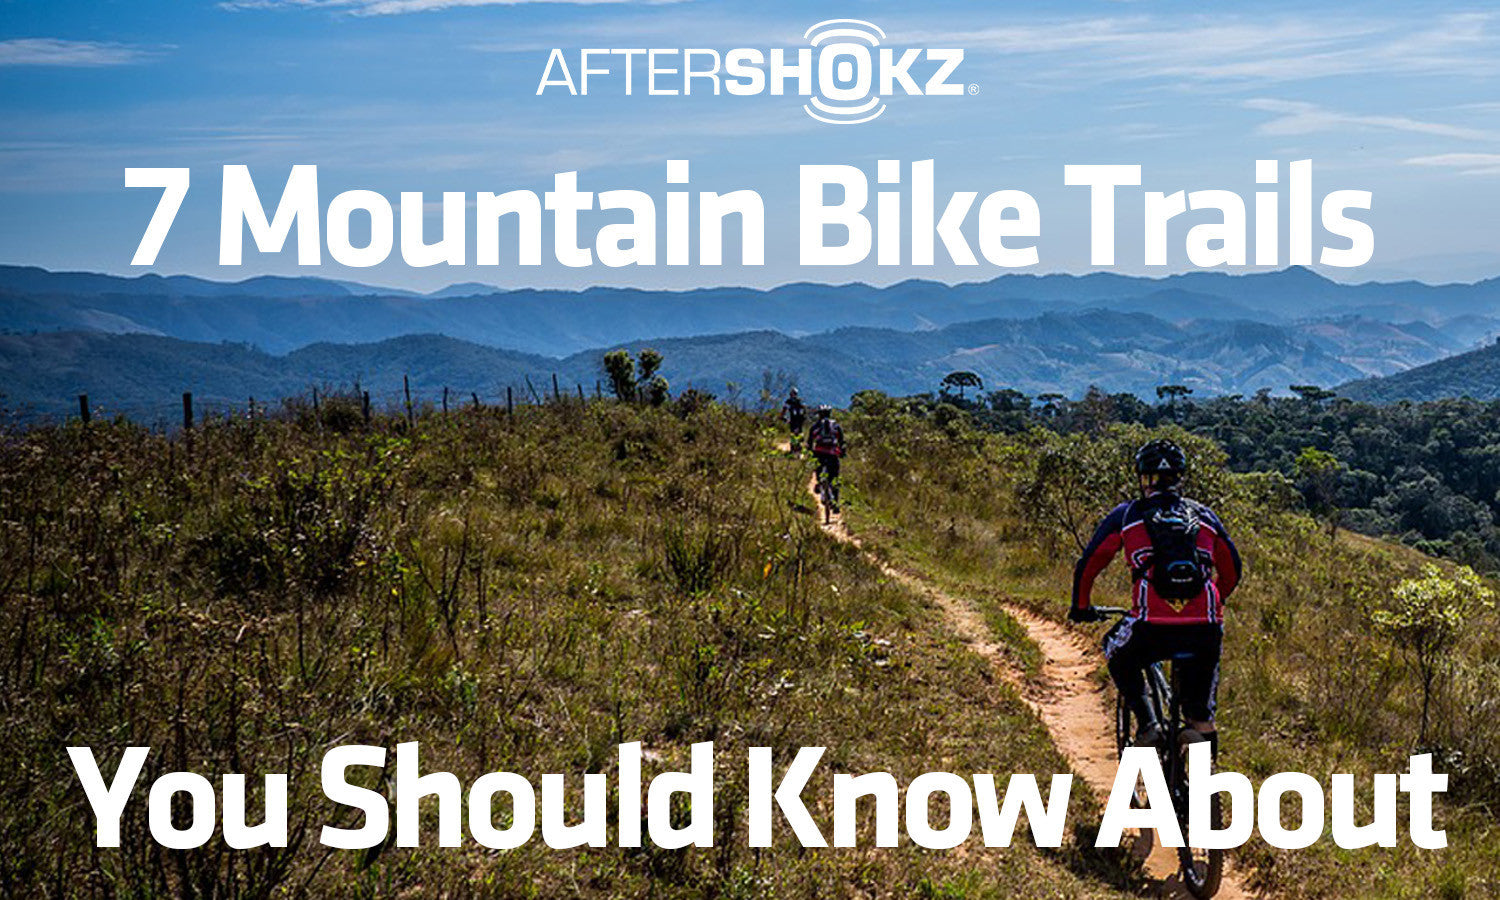 7 Mountain Bike Trails You Should Know About